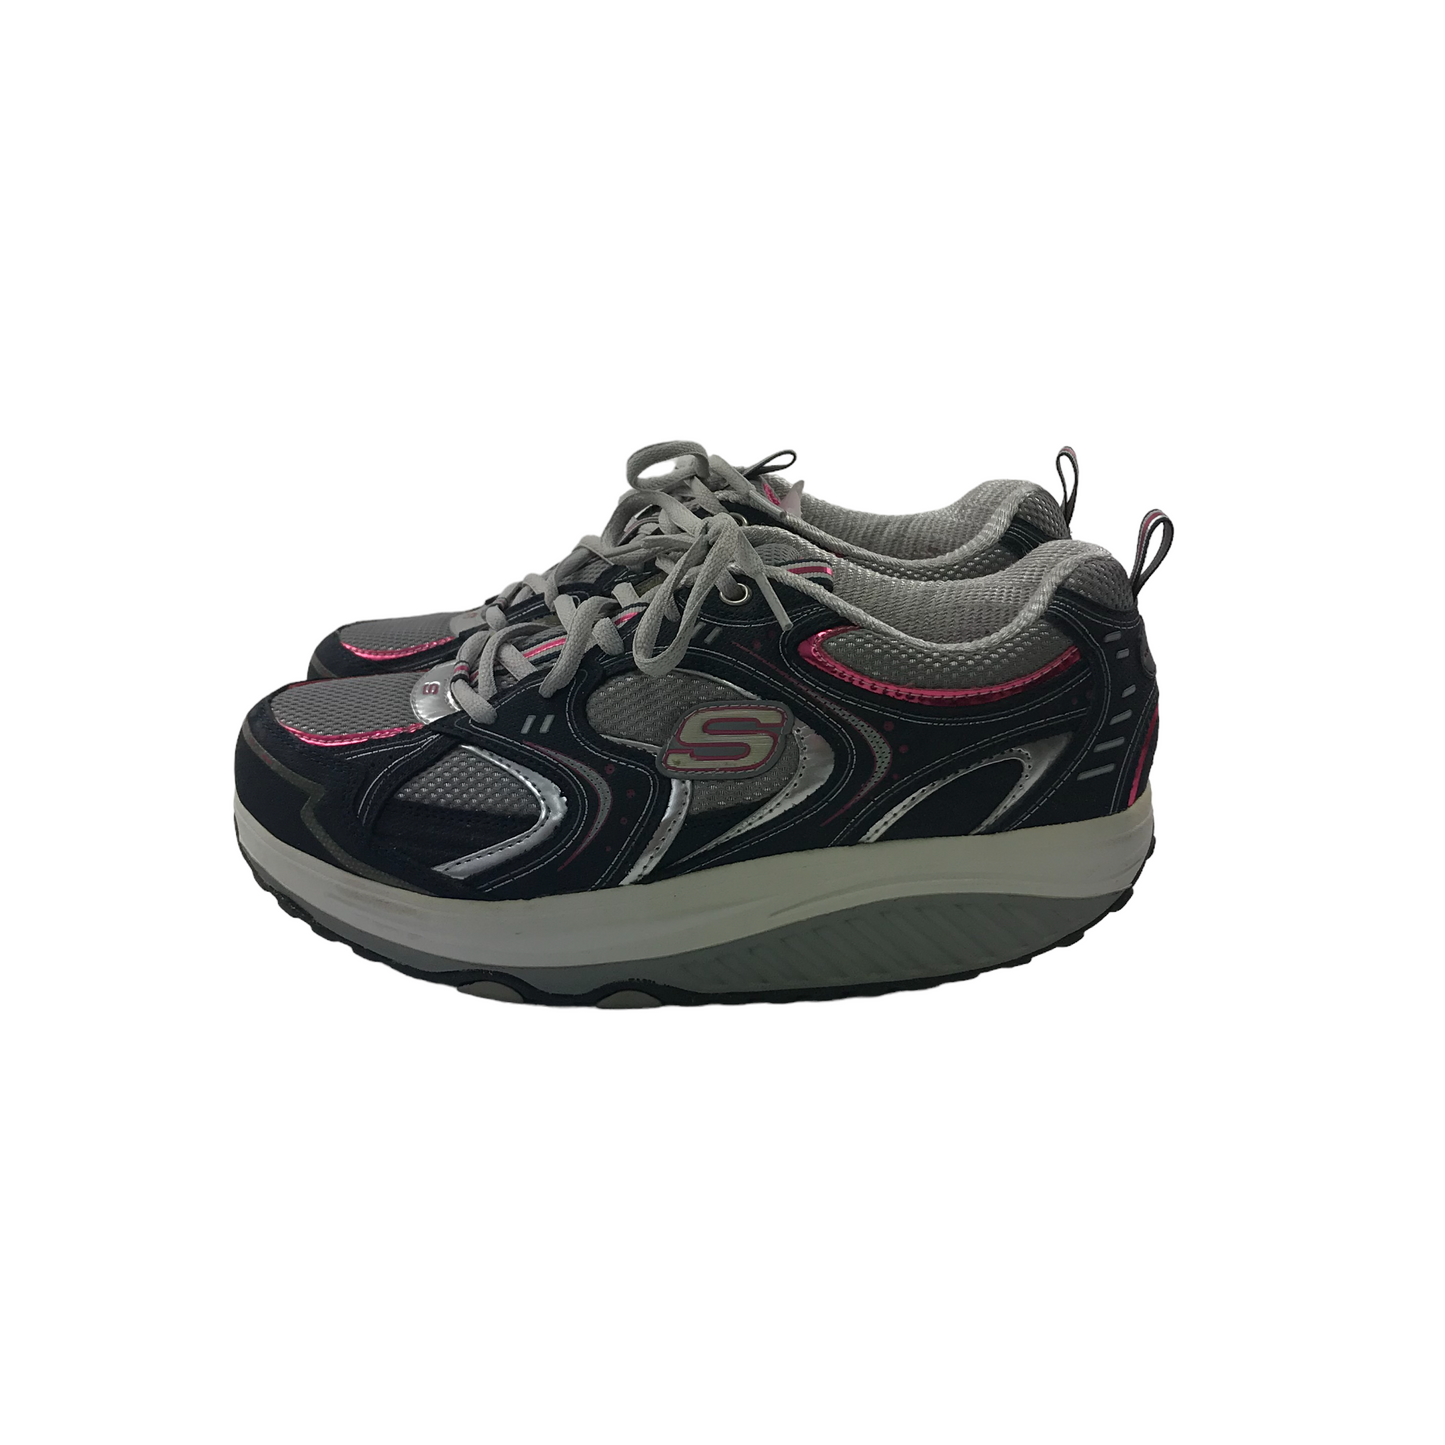 Skechers Shape-Ups Grey and Pink Trainers Shoe Size 7